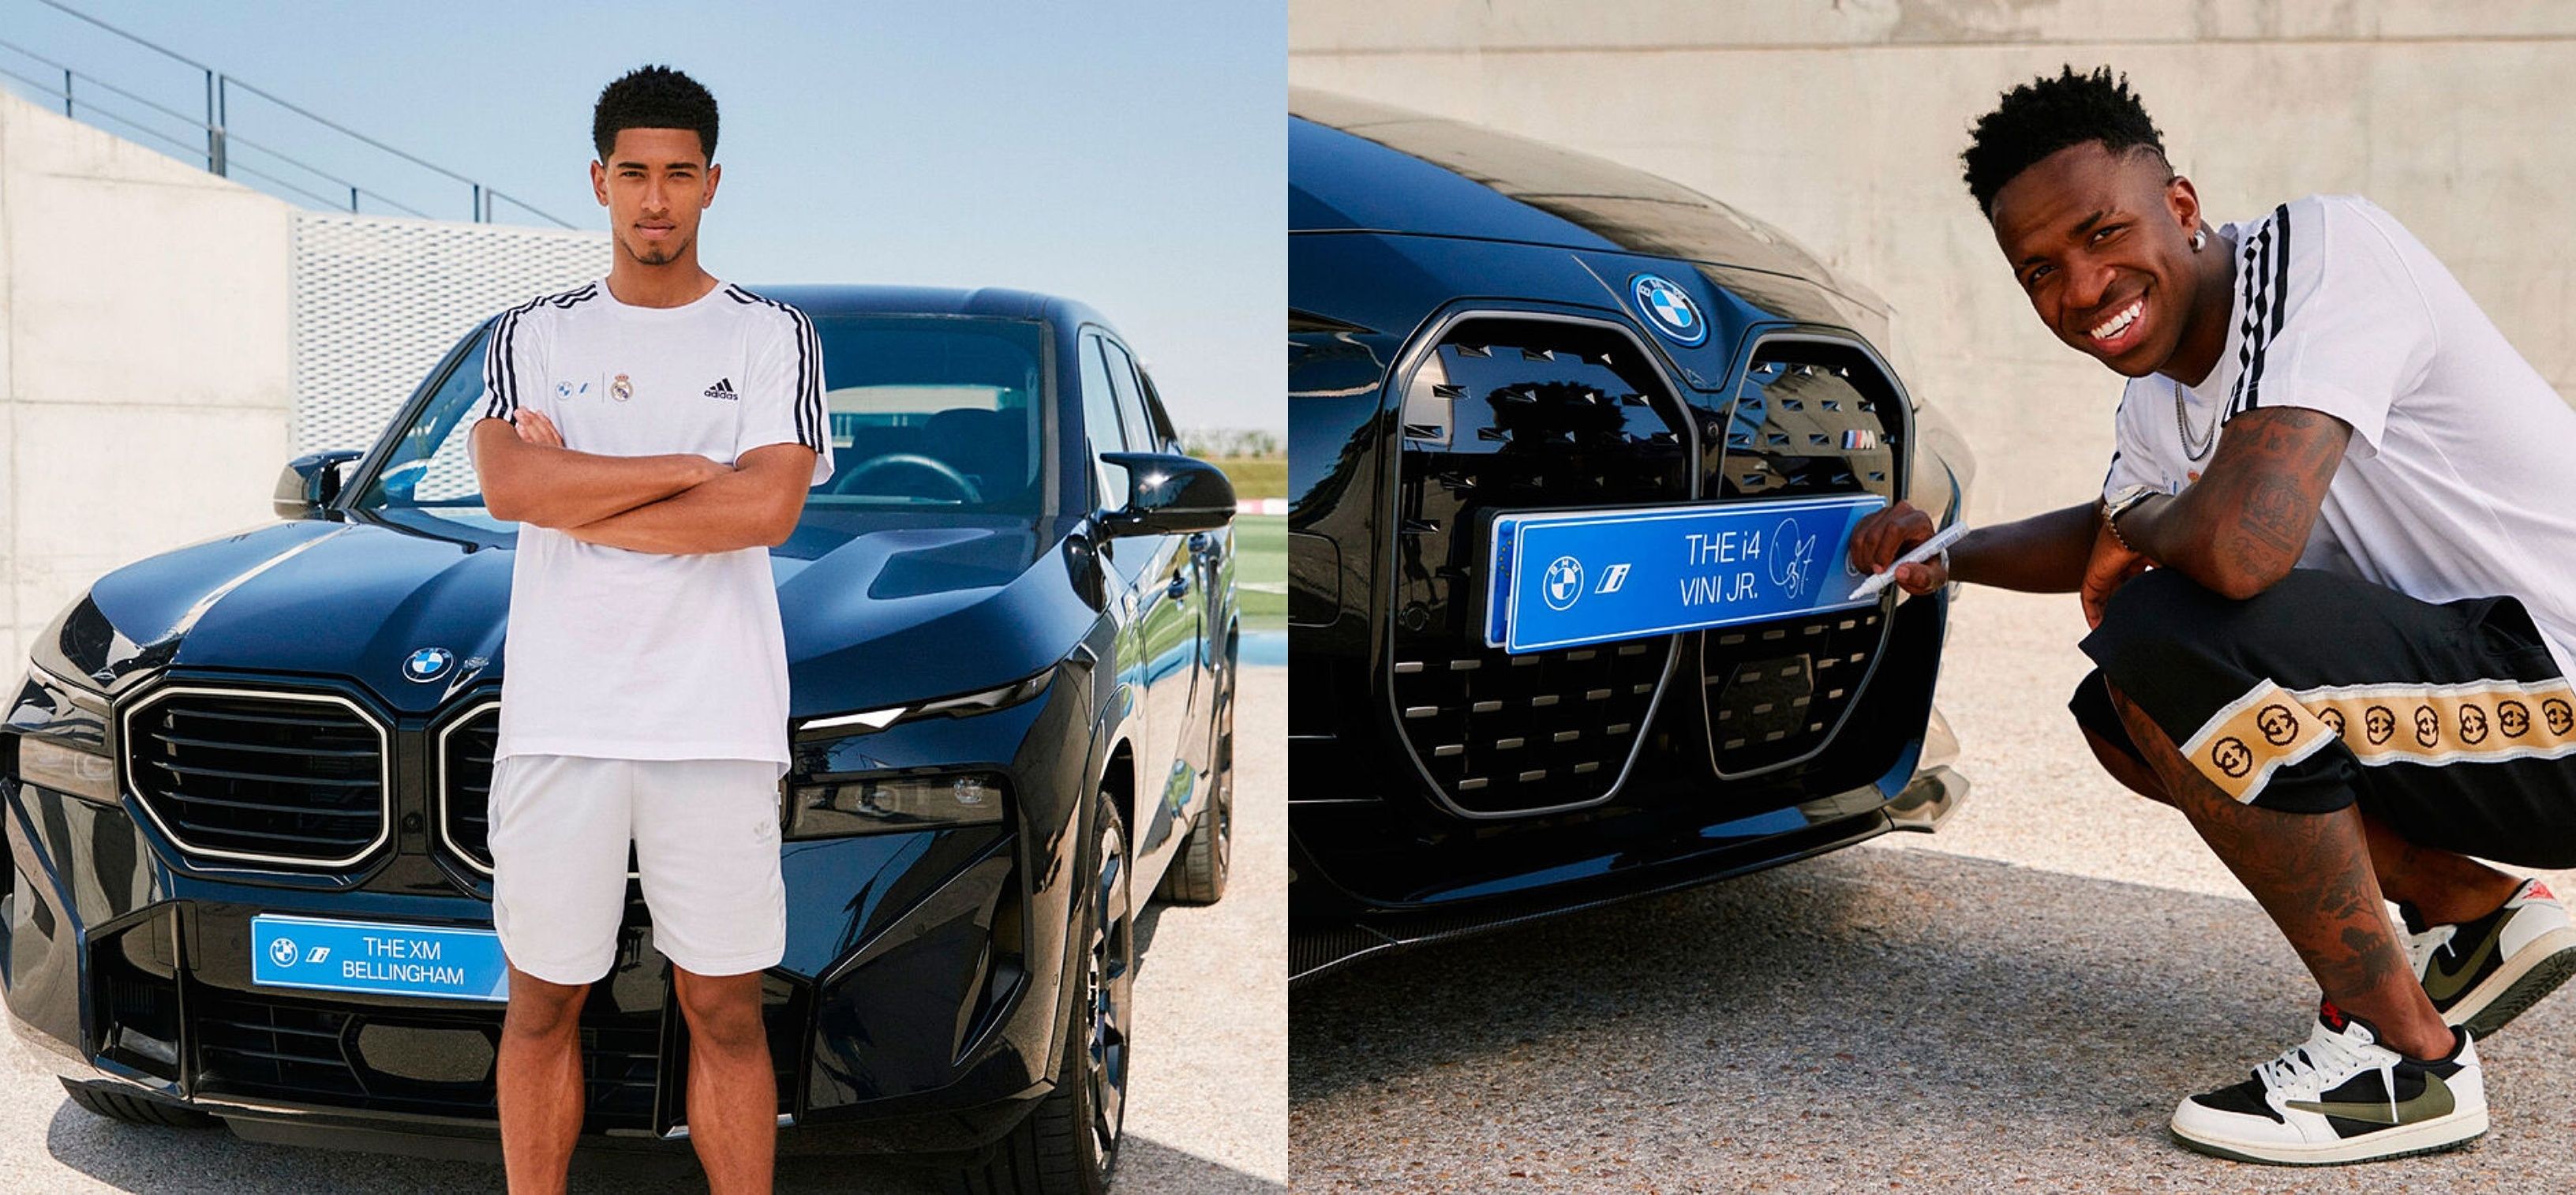 These are the luxury cars of Real Madrid players, Bellingham chose